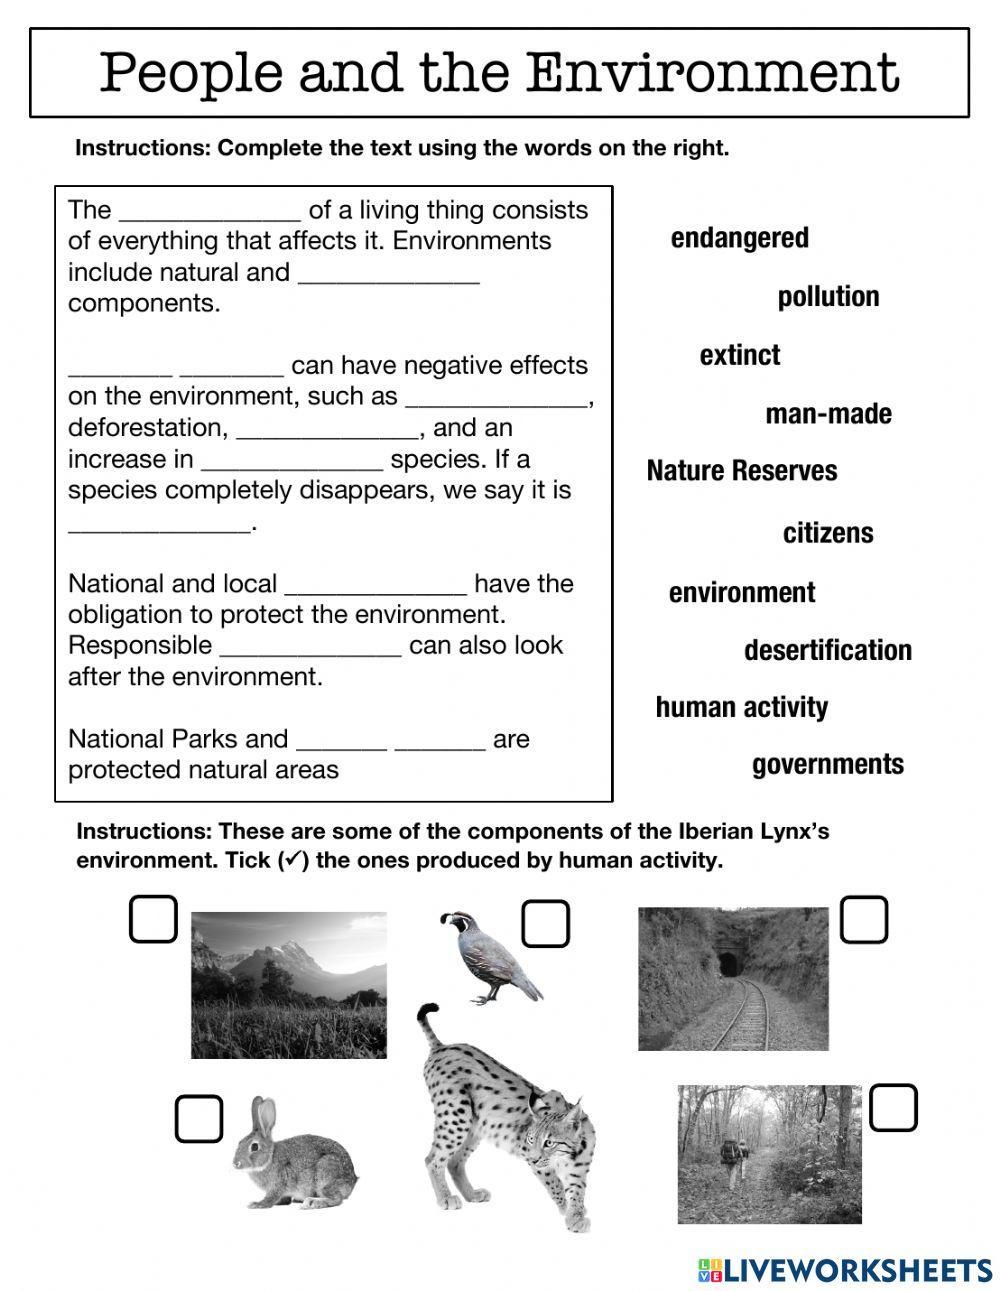 People and the Environment PRINTABLE